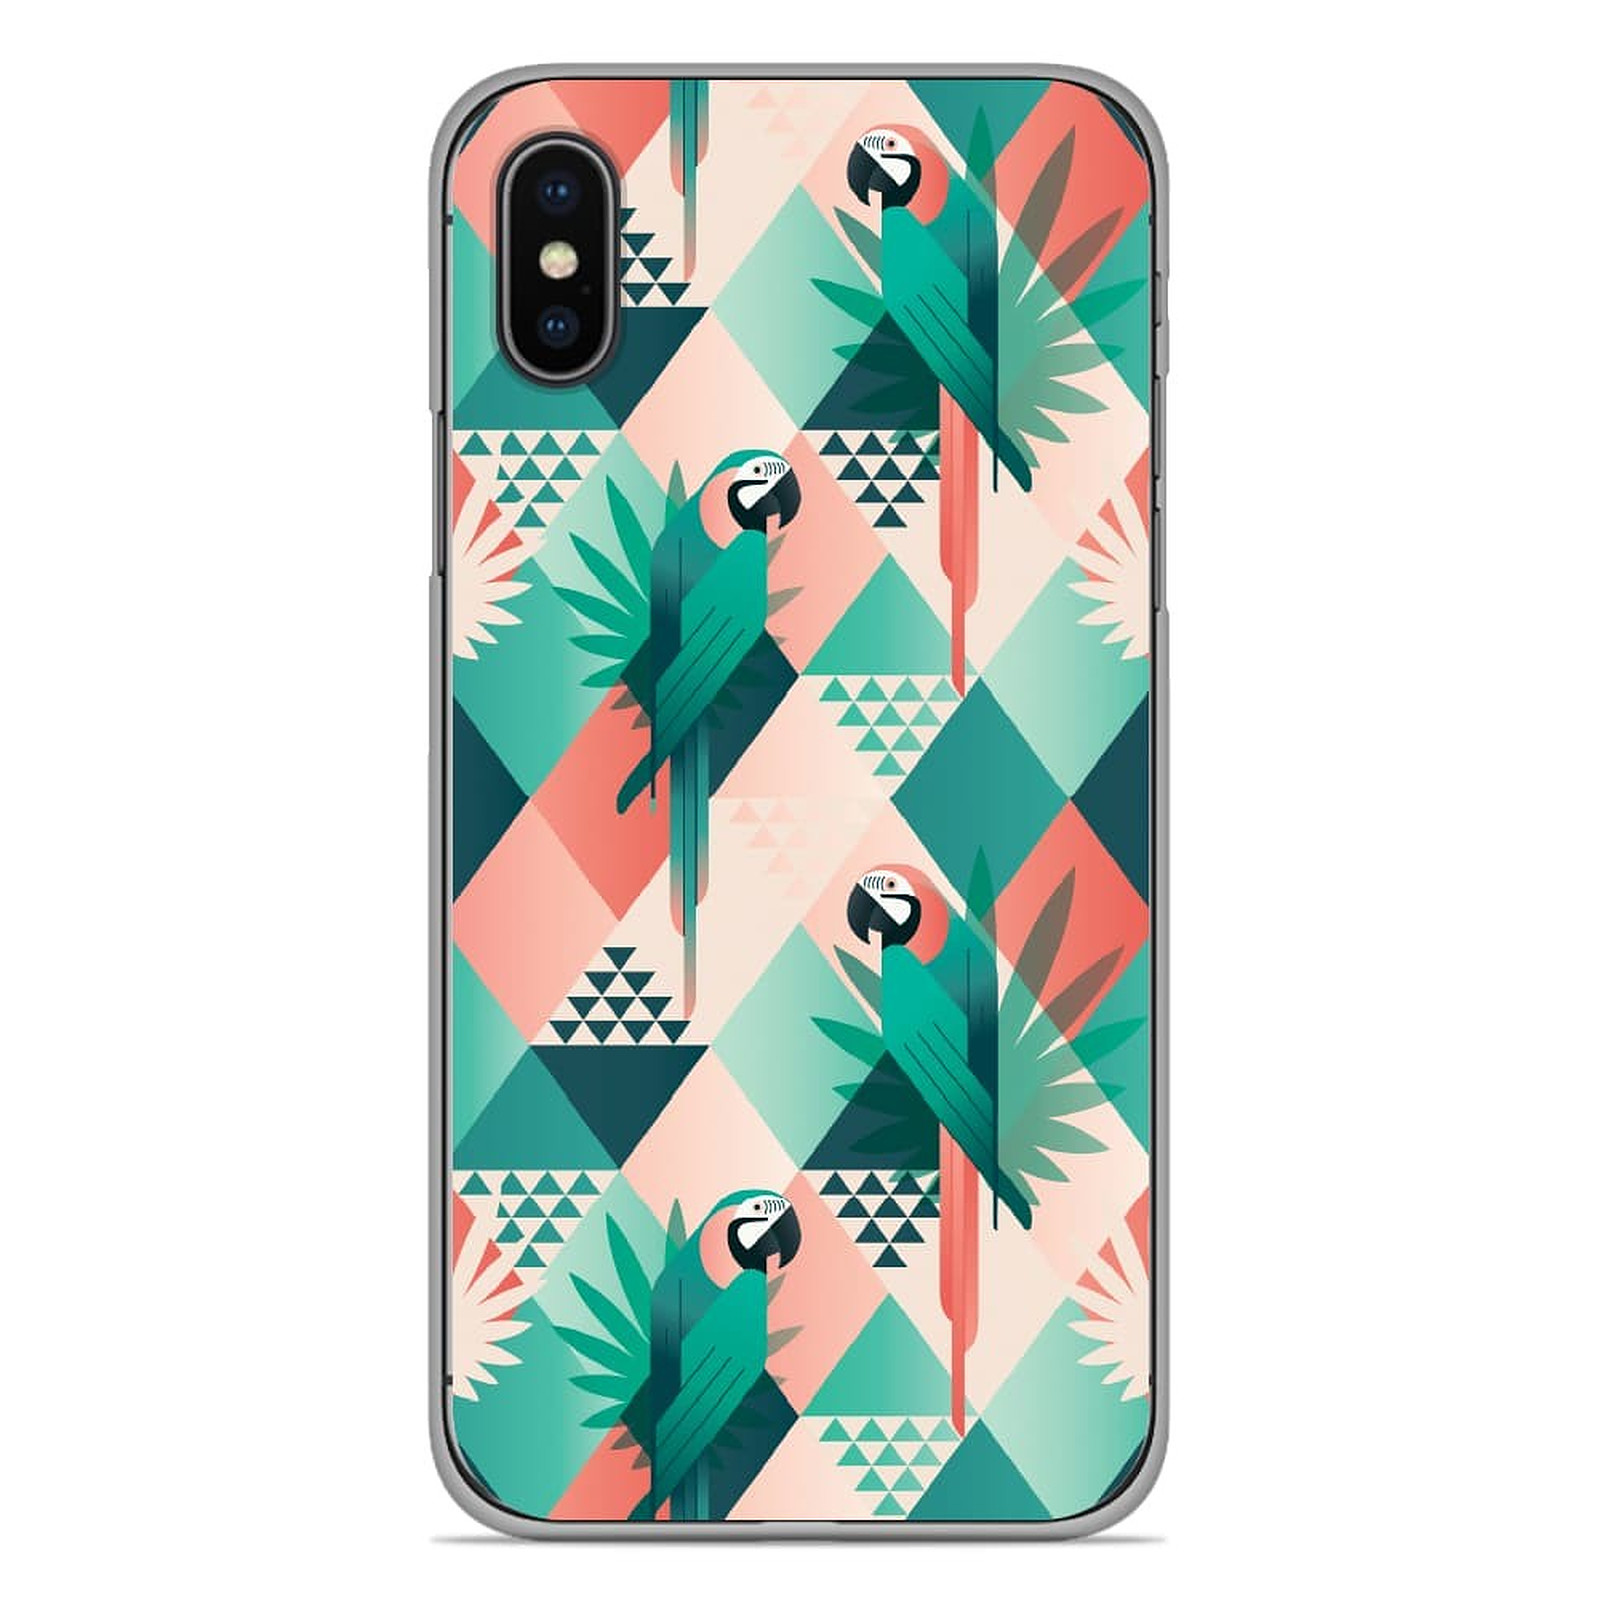 1001 Coques Coque silicone gel Apple iPhone X / XS motif Perroquet ge´ome´trique - Coque telephone 1001Coques